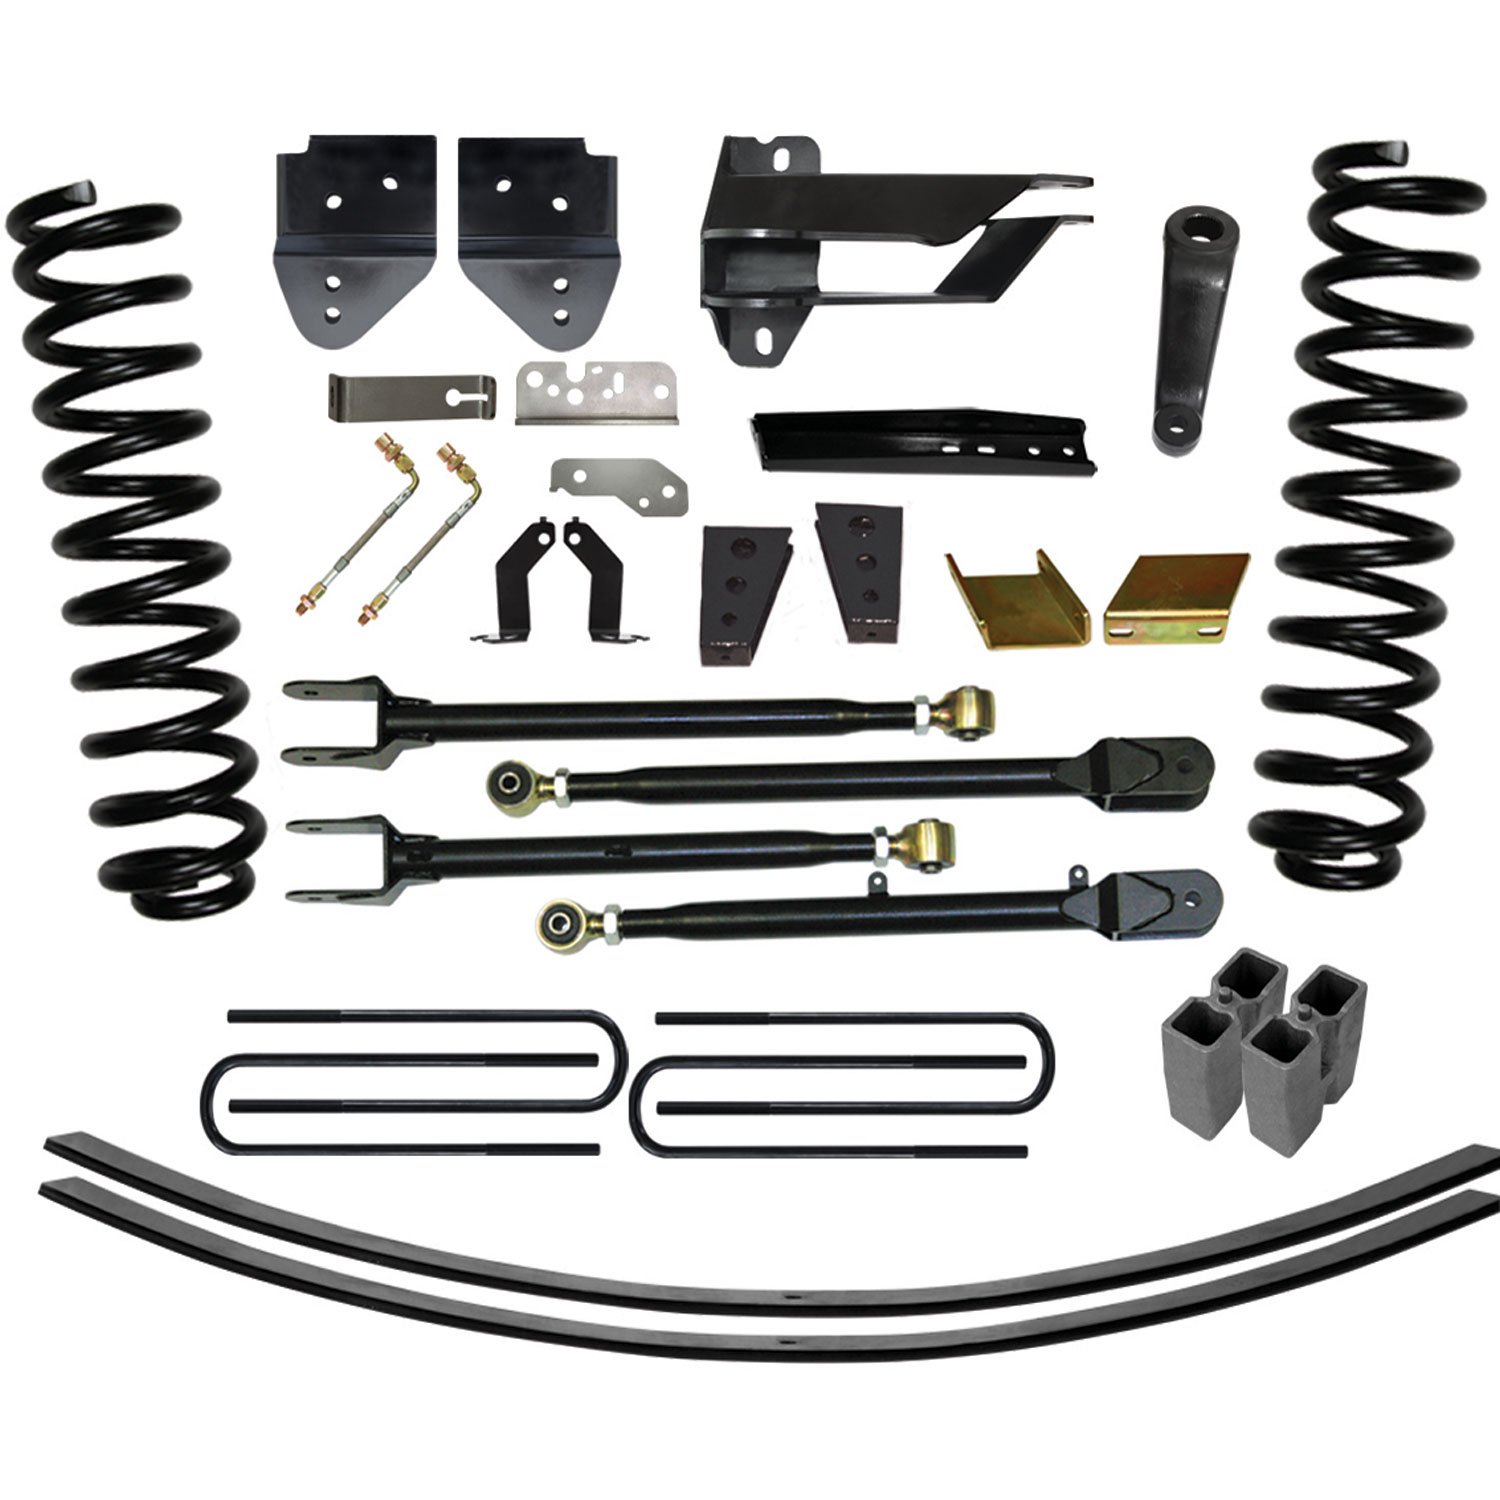 8.5 in Lift Kit for 2017-Up Ford F-250/F-350 SuperDuty Diesel